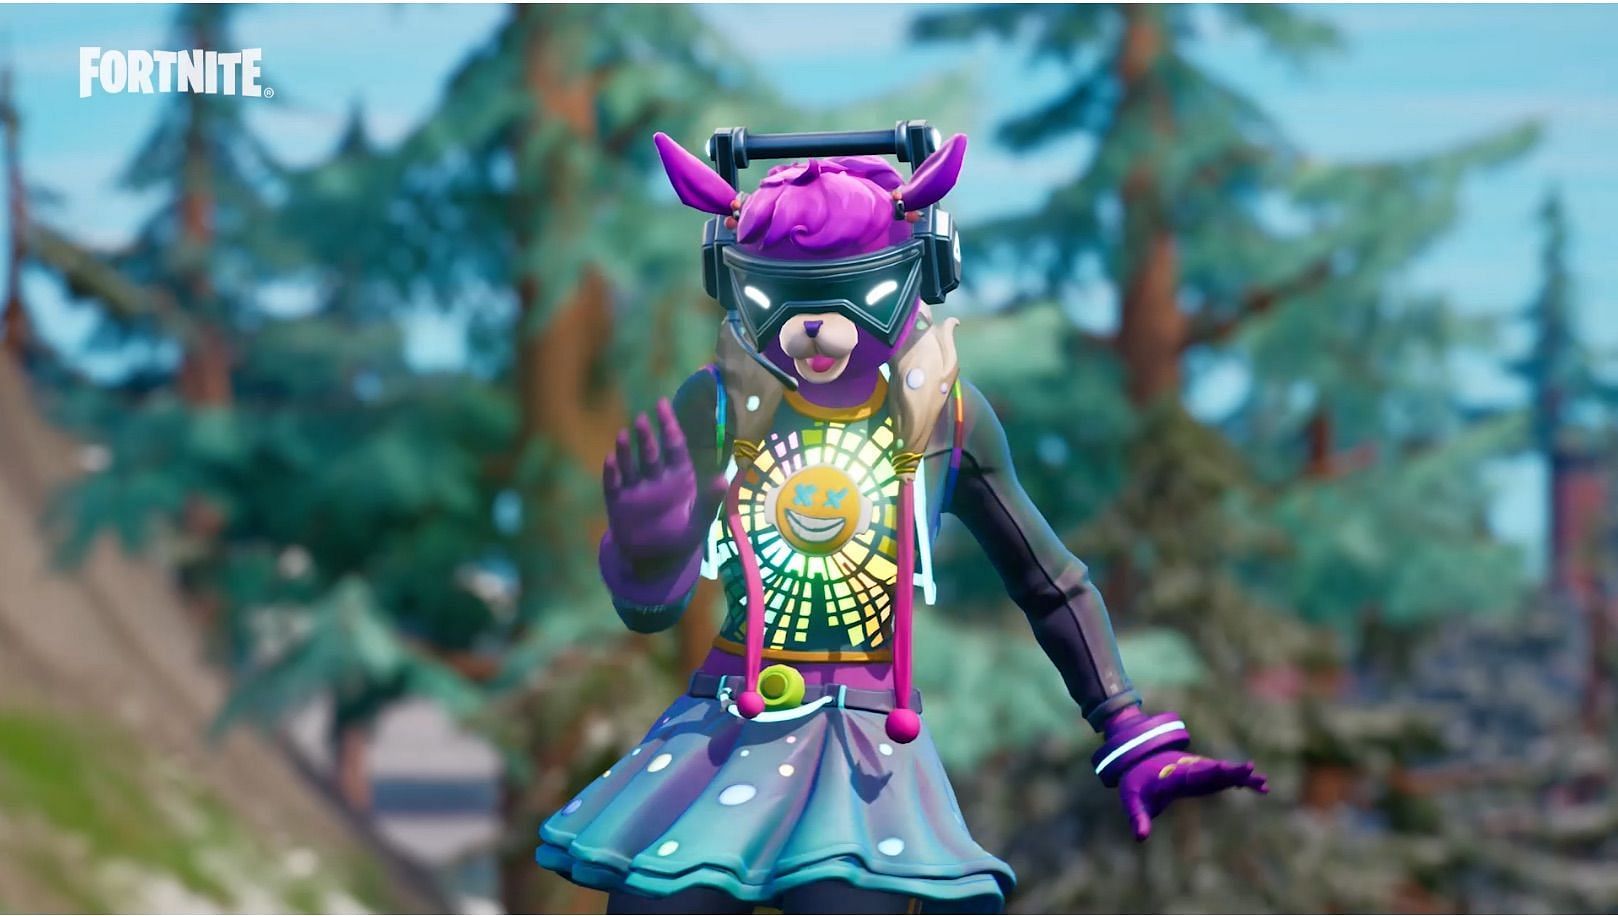 Emoting is a prominent aspect in Fortnite (Image via Epic Games)